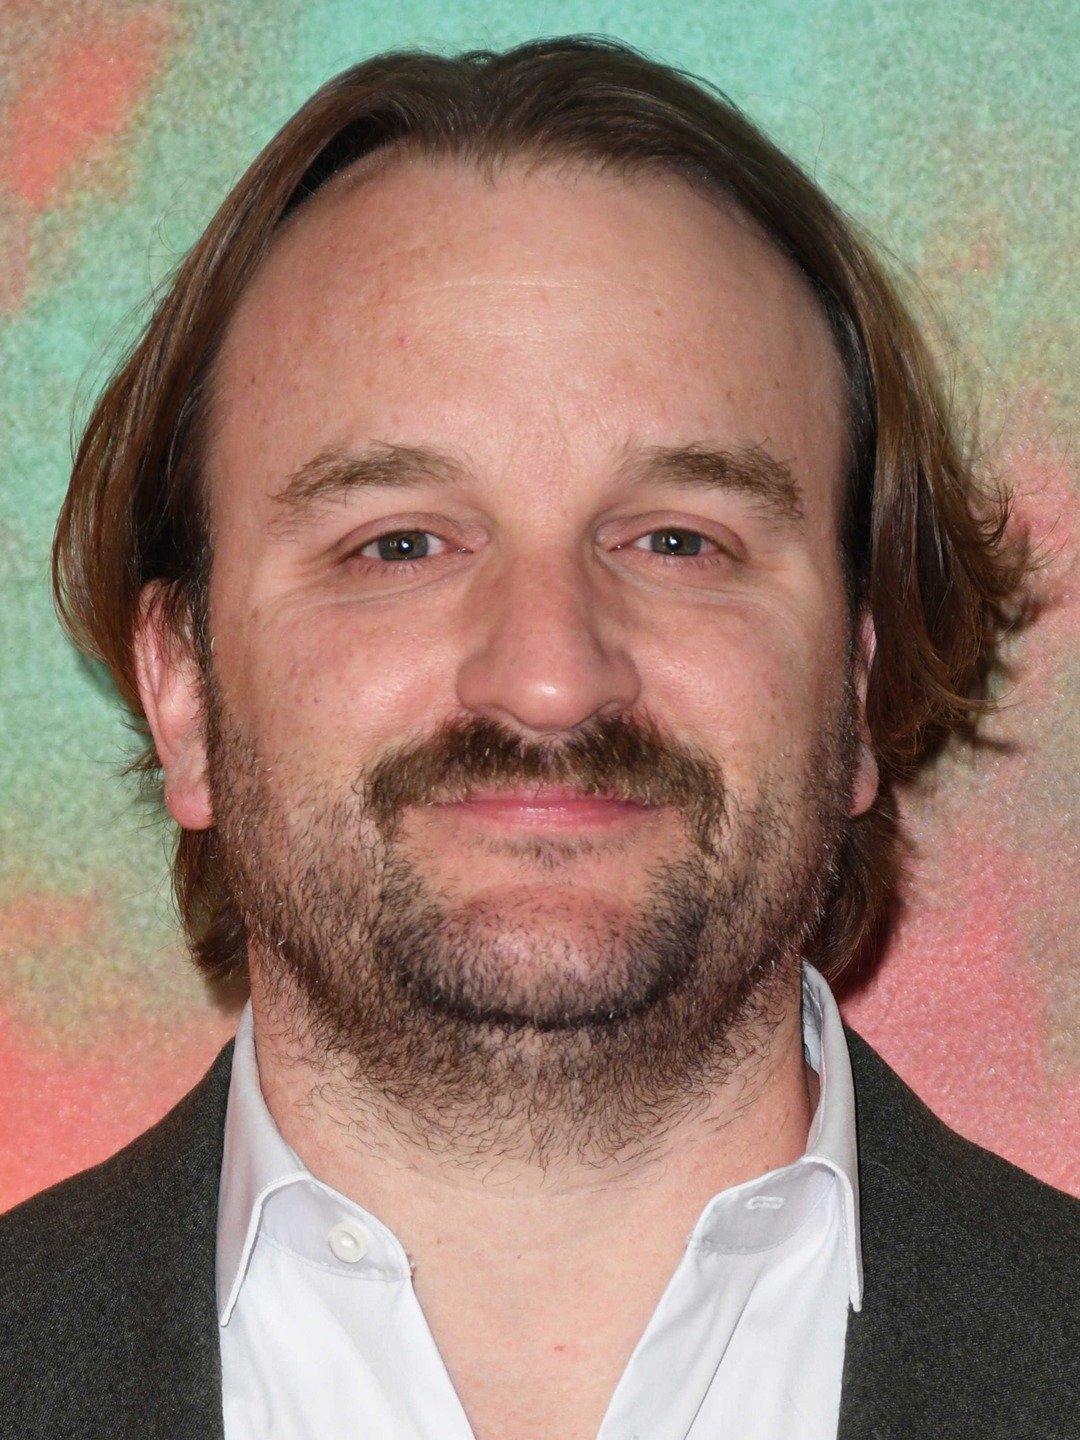 How tall is Lenny Jacobson?